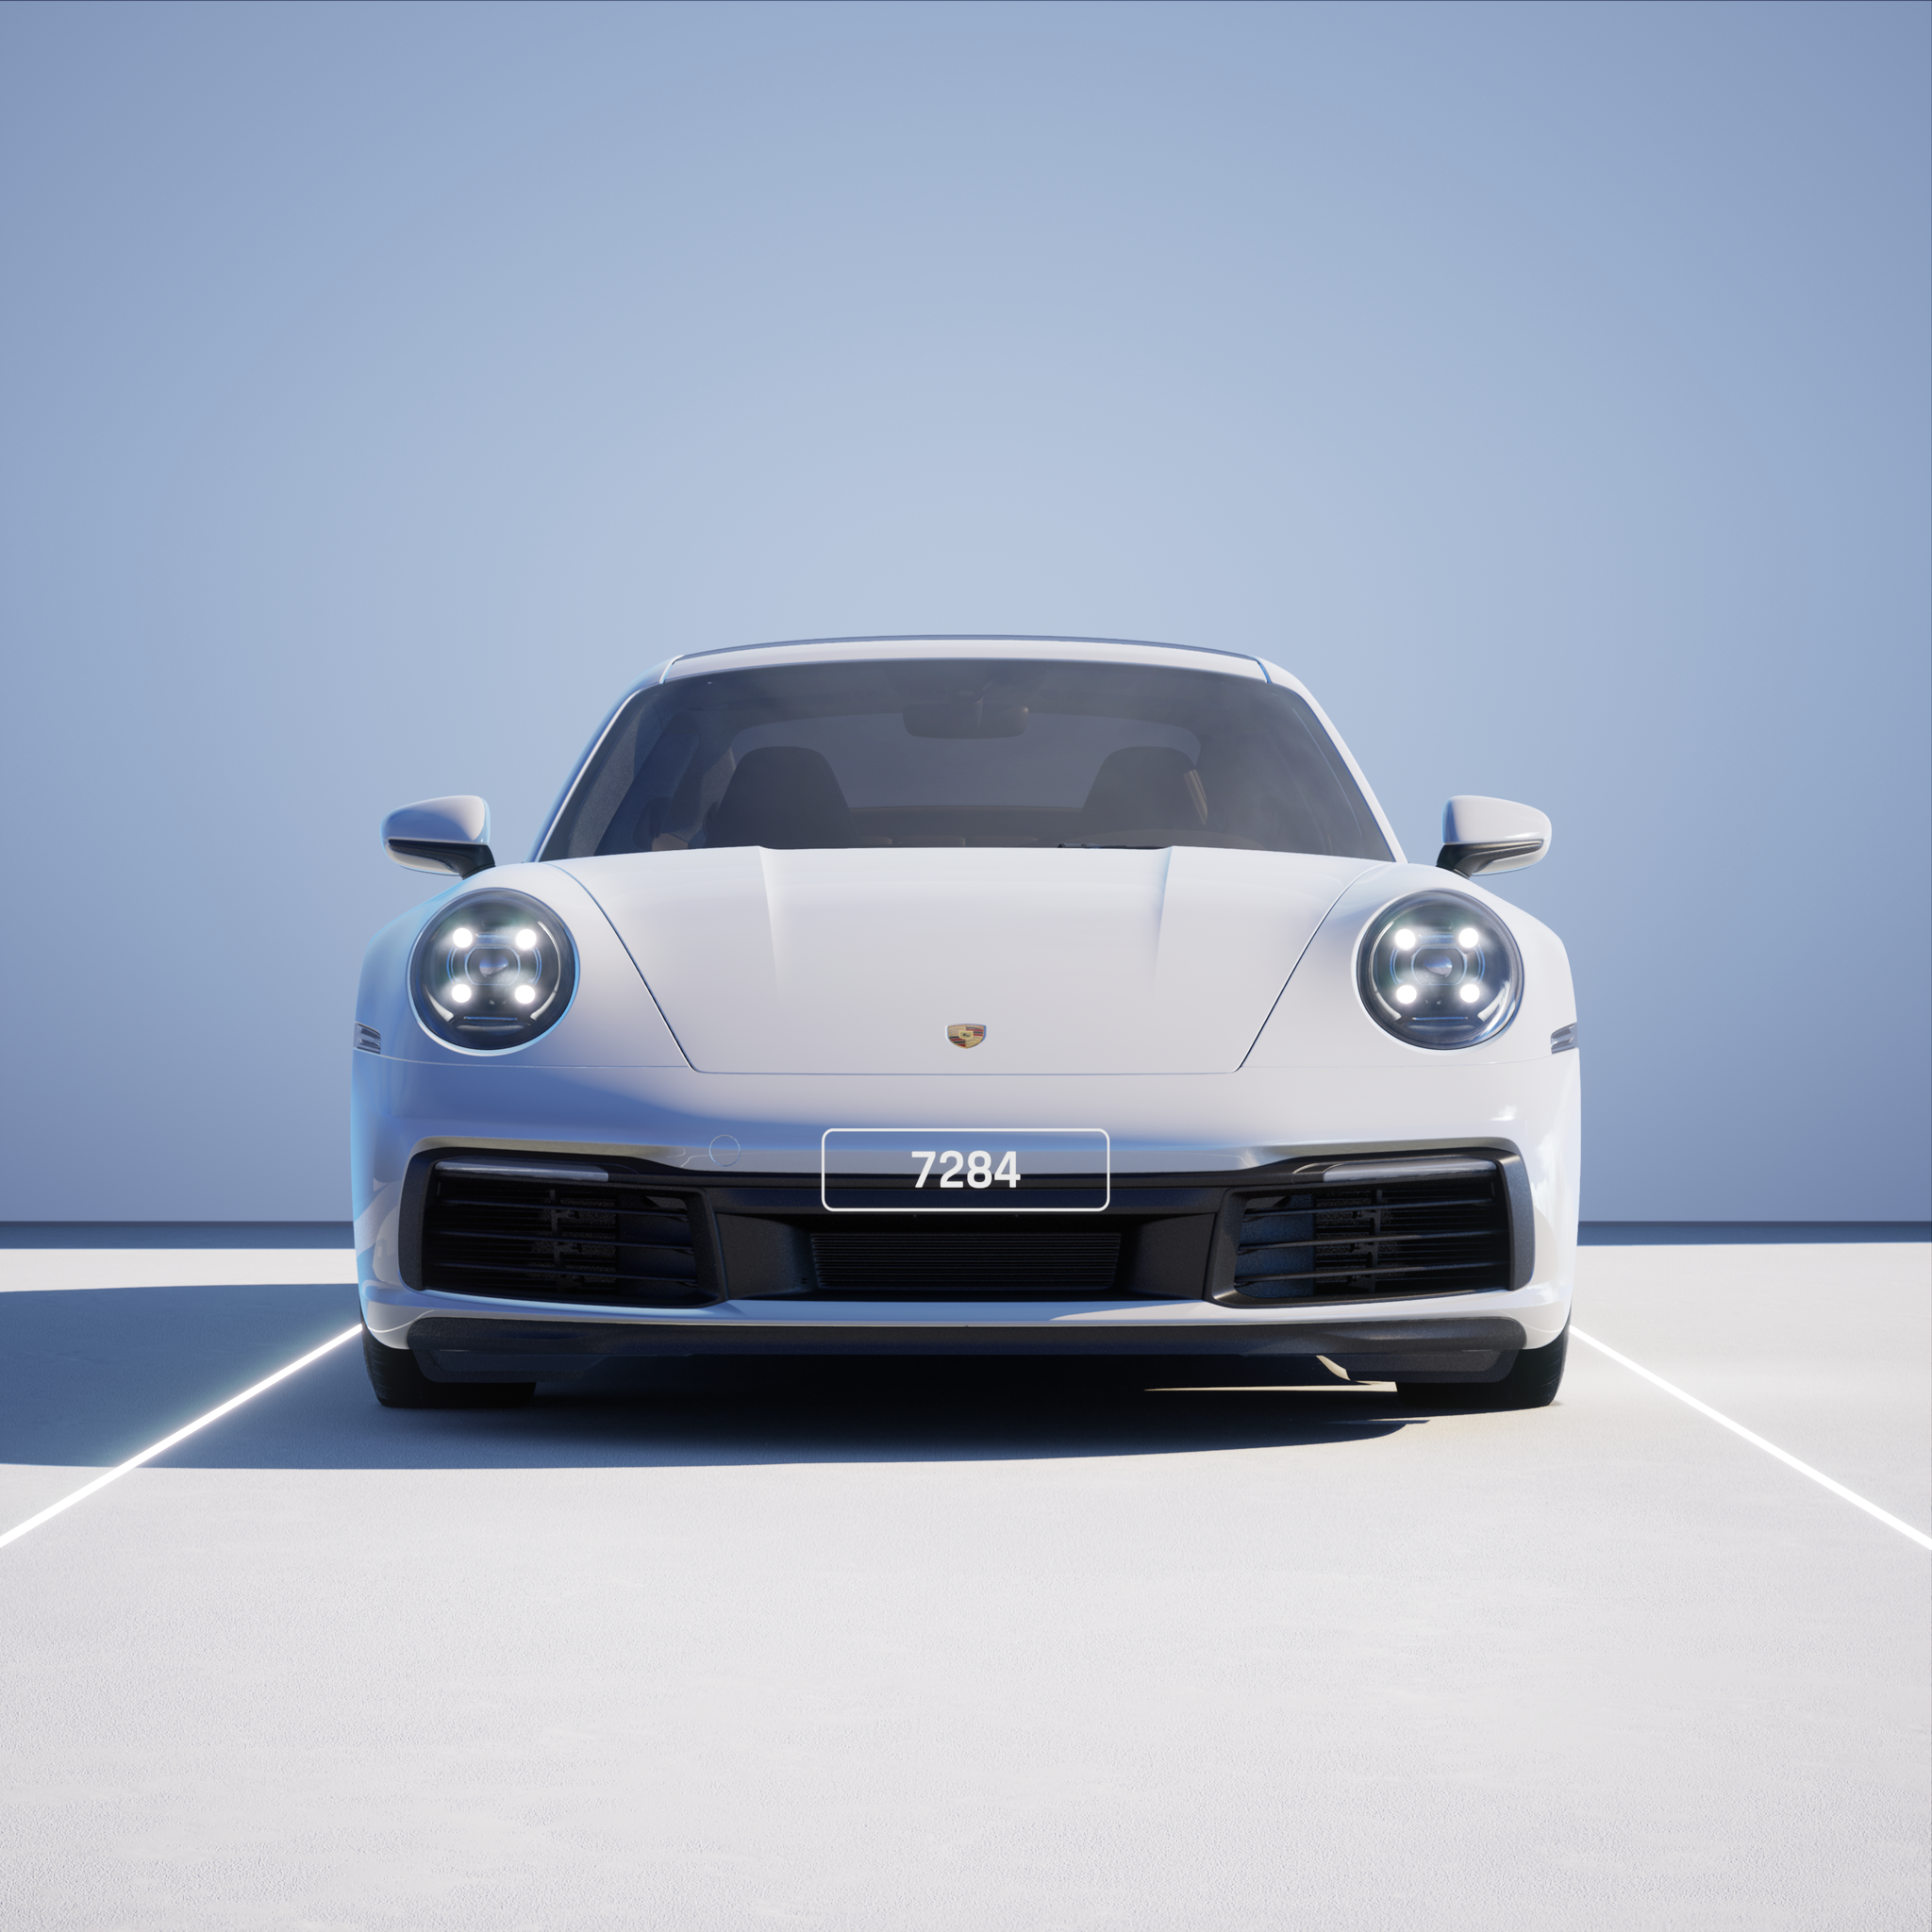 The PORSCHΞ 911 7284 image in phase